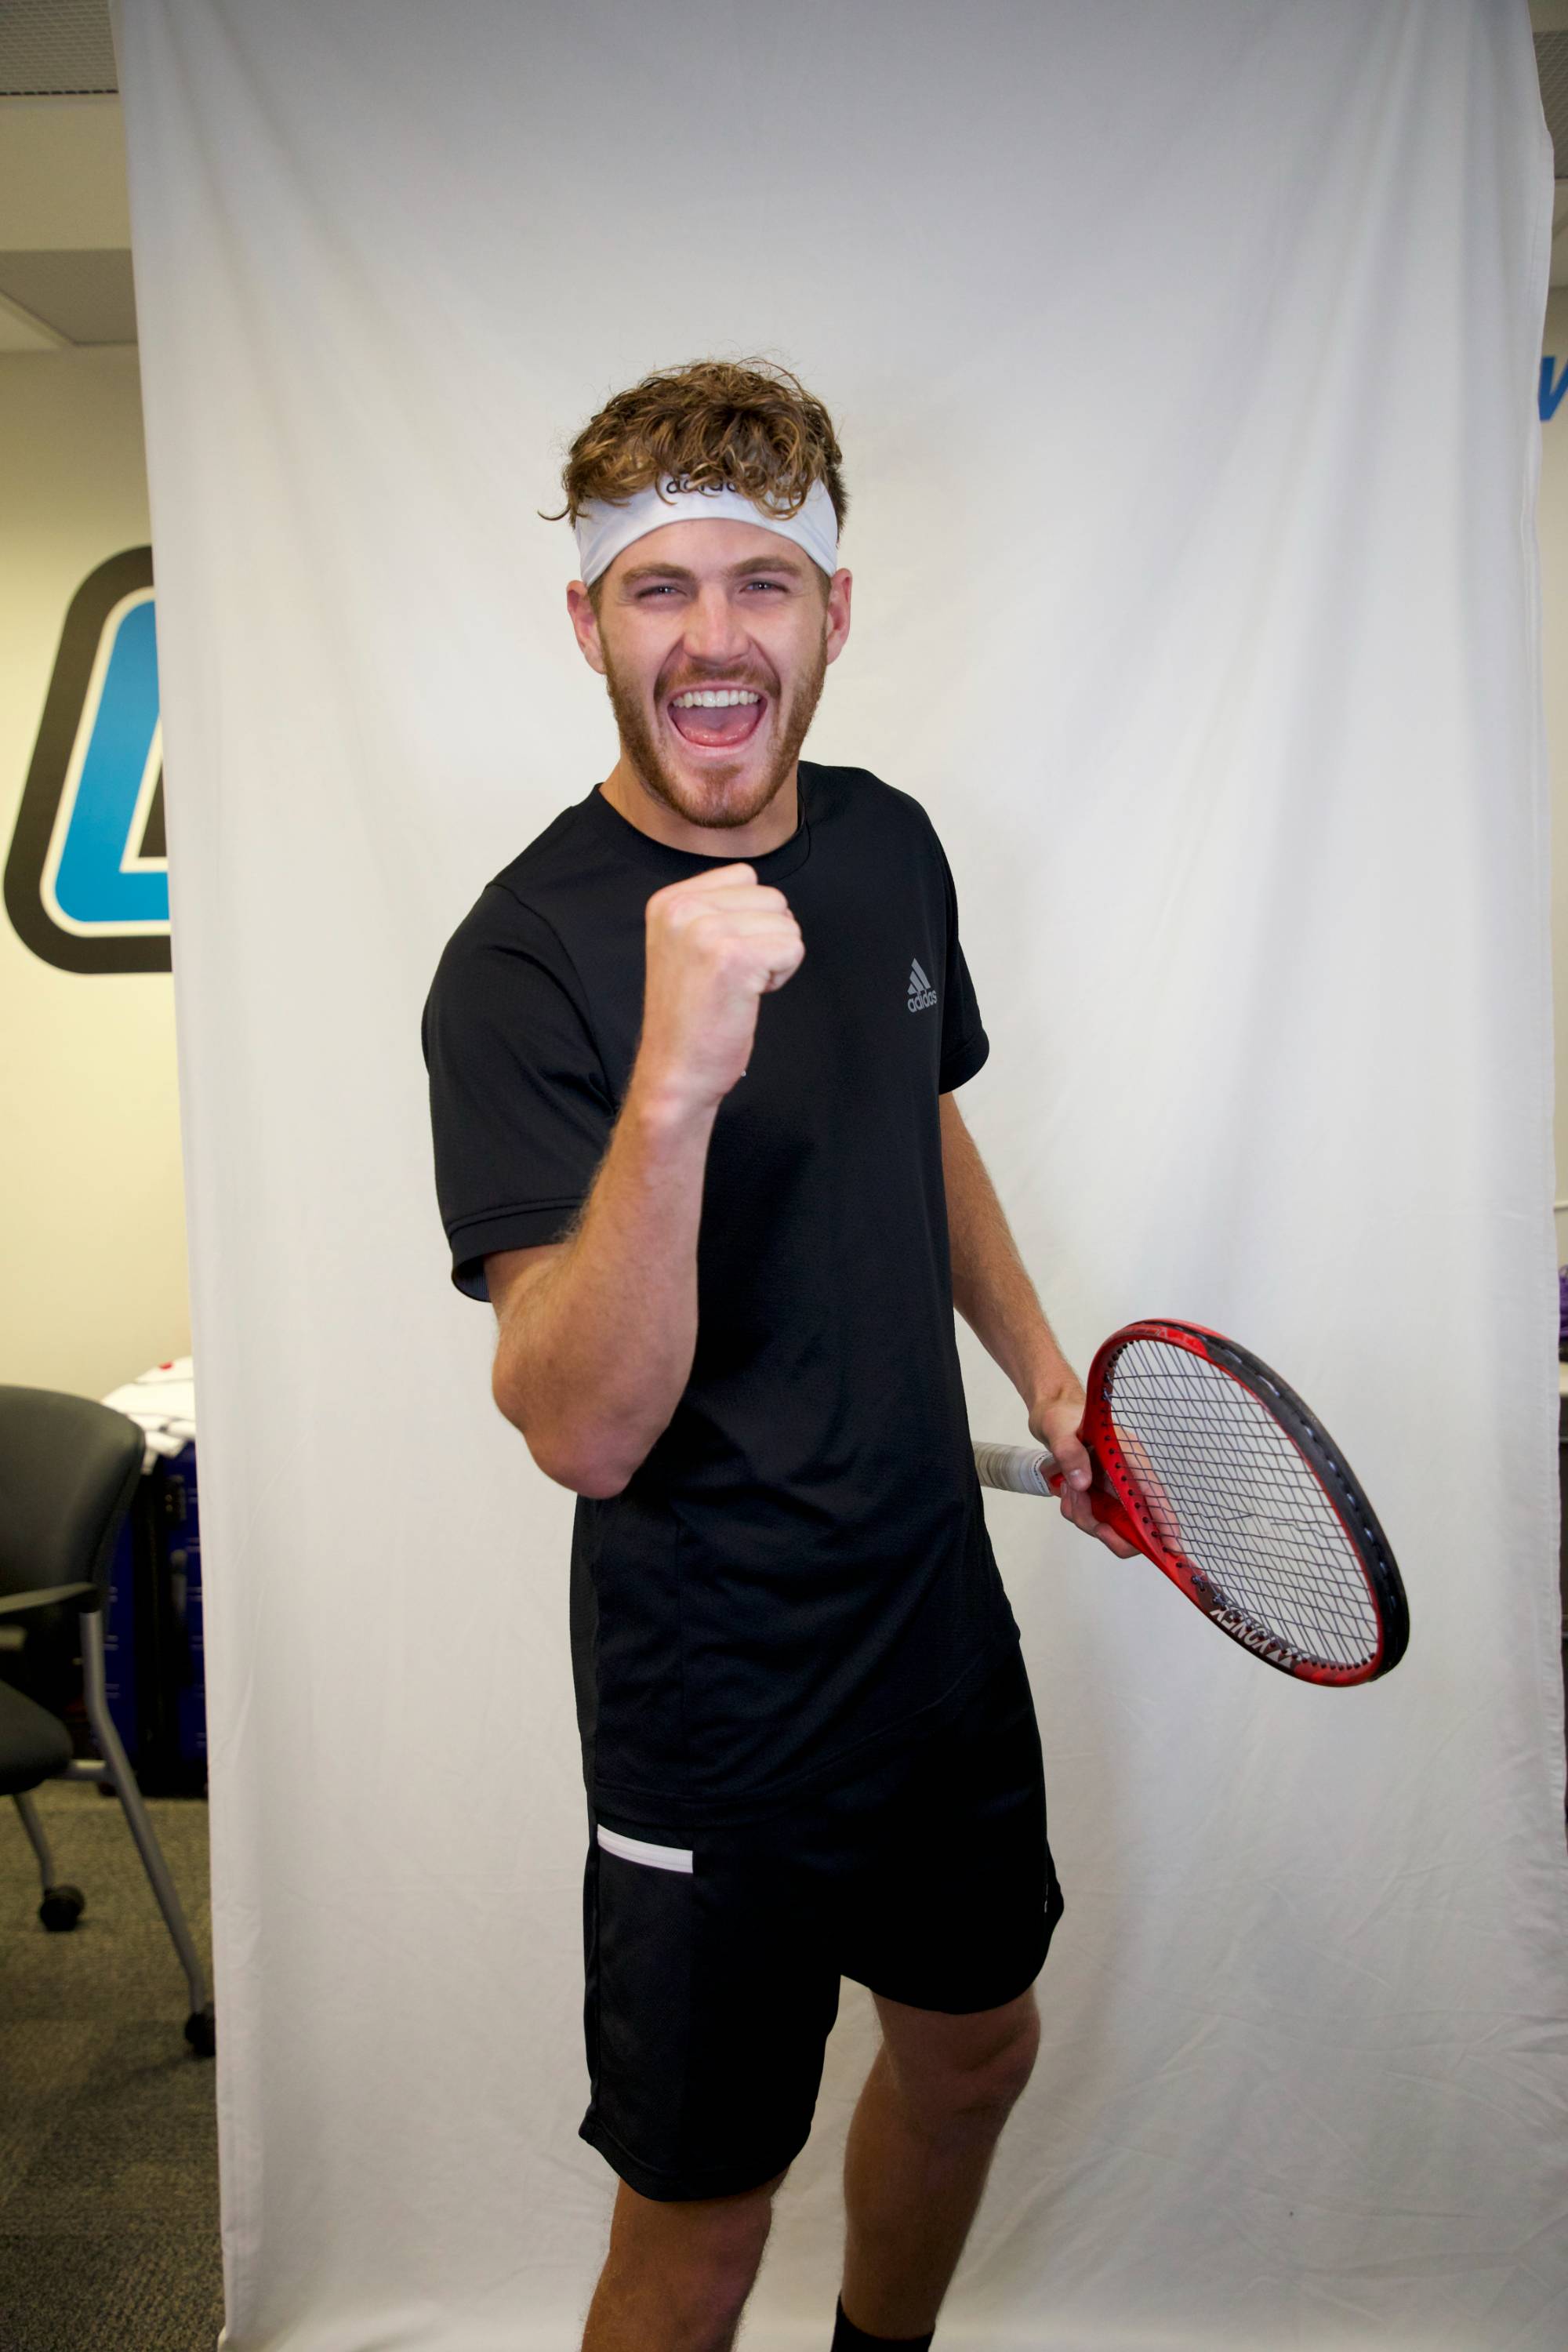 Men's Tennis Player Jack Dausman posing for a picture on media day, tennis racket in hand and fist cliched celebrating while smiling